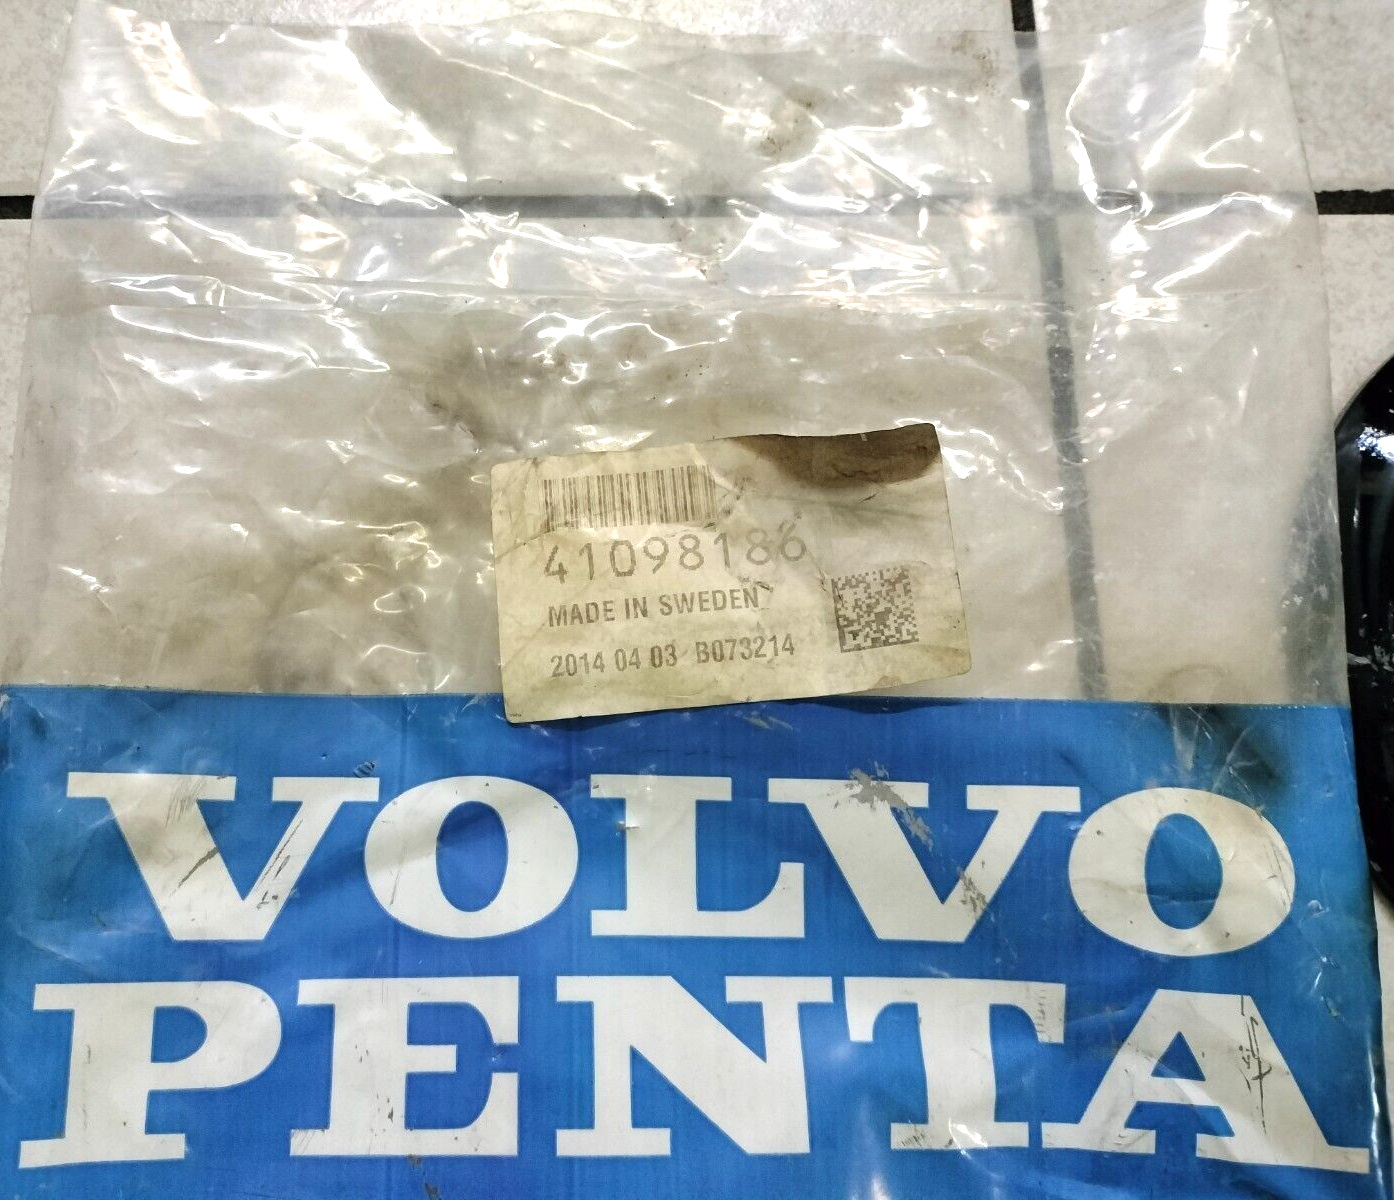 VOLVO PENTA AQ-D6 MOUNTING KIT .. NEW IN BAG ... DESCRIPTION SHOWS KIT CONTENTS